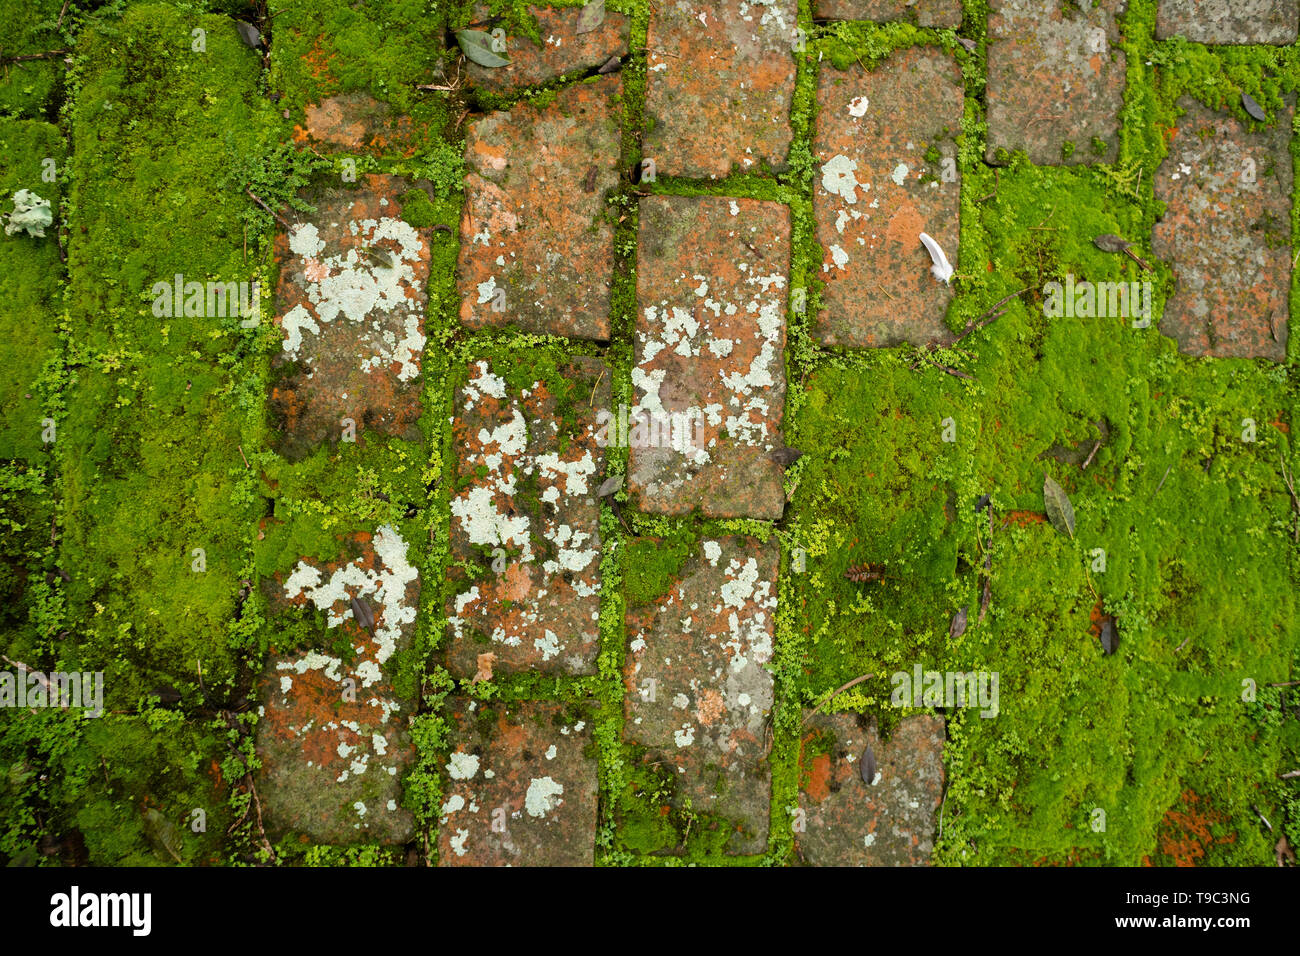 Old brick flooring with moss and lychen growth Stock Photo